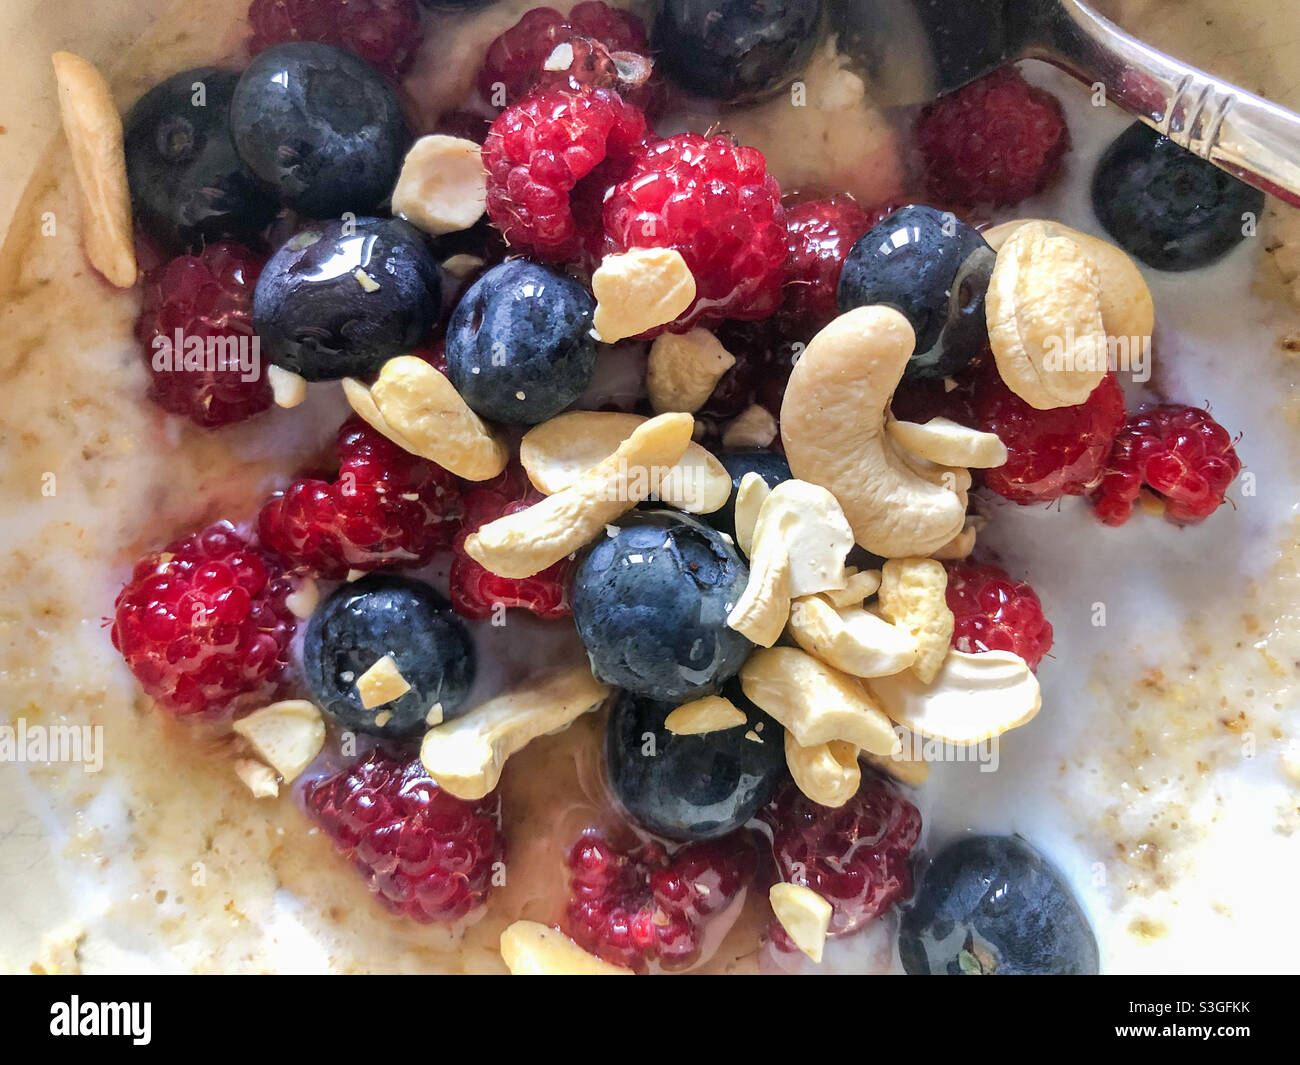 Close up view of porridge with raspberries, blueberries and cashew nuts for breakfast. Stock Photo